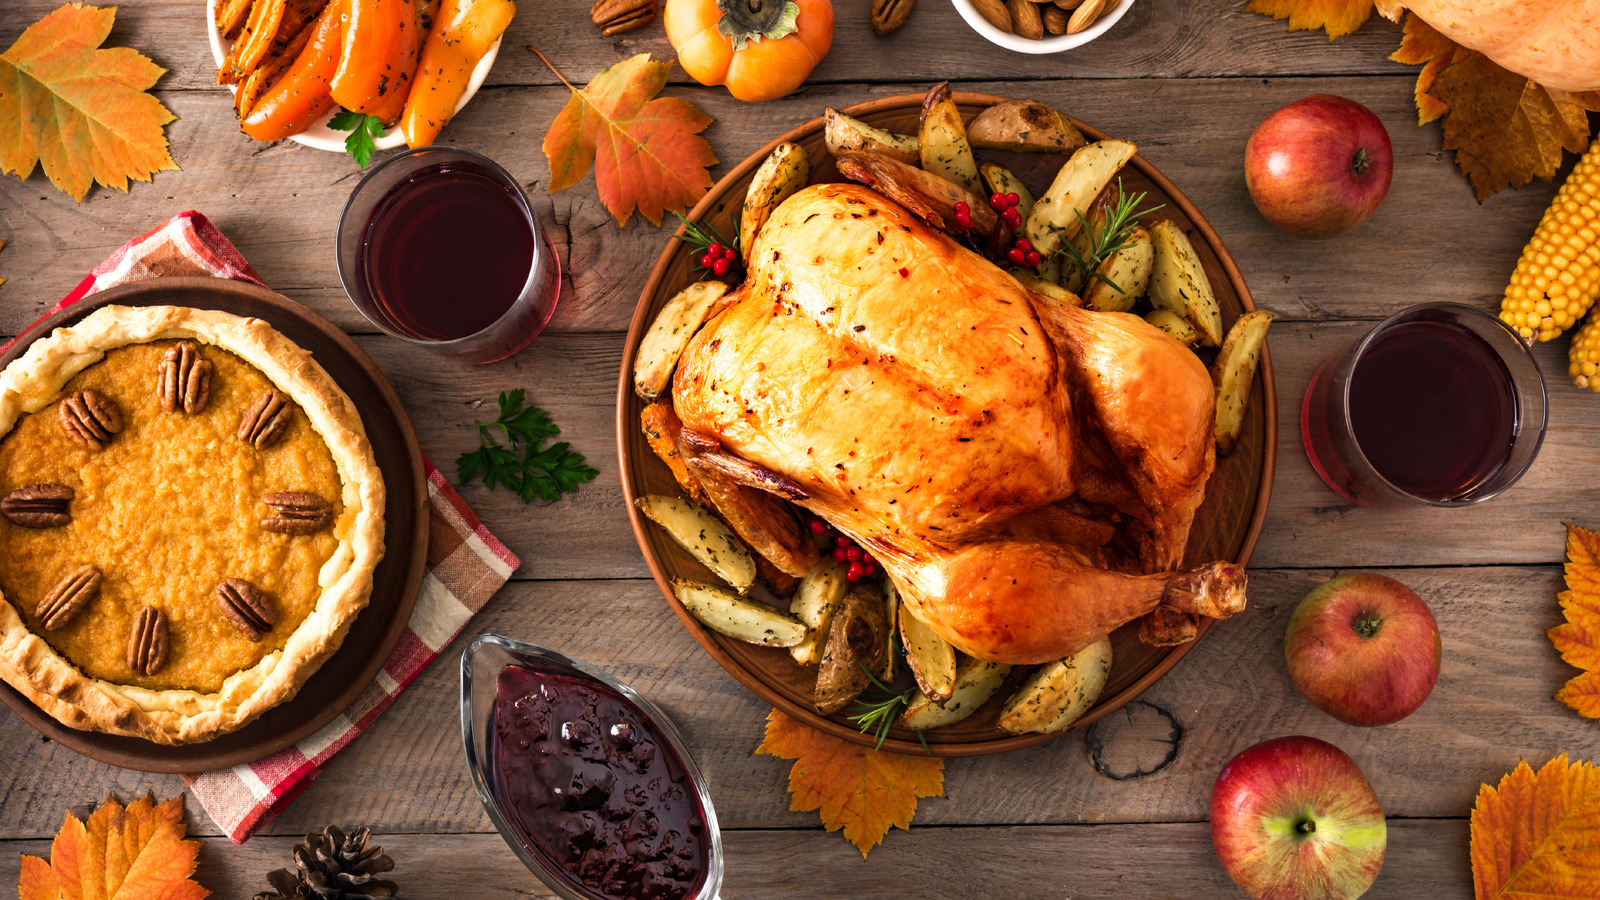 What To Order At El Pollo Loco For Thanksgiving